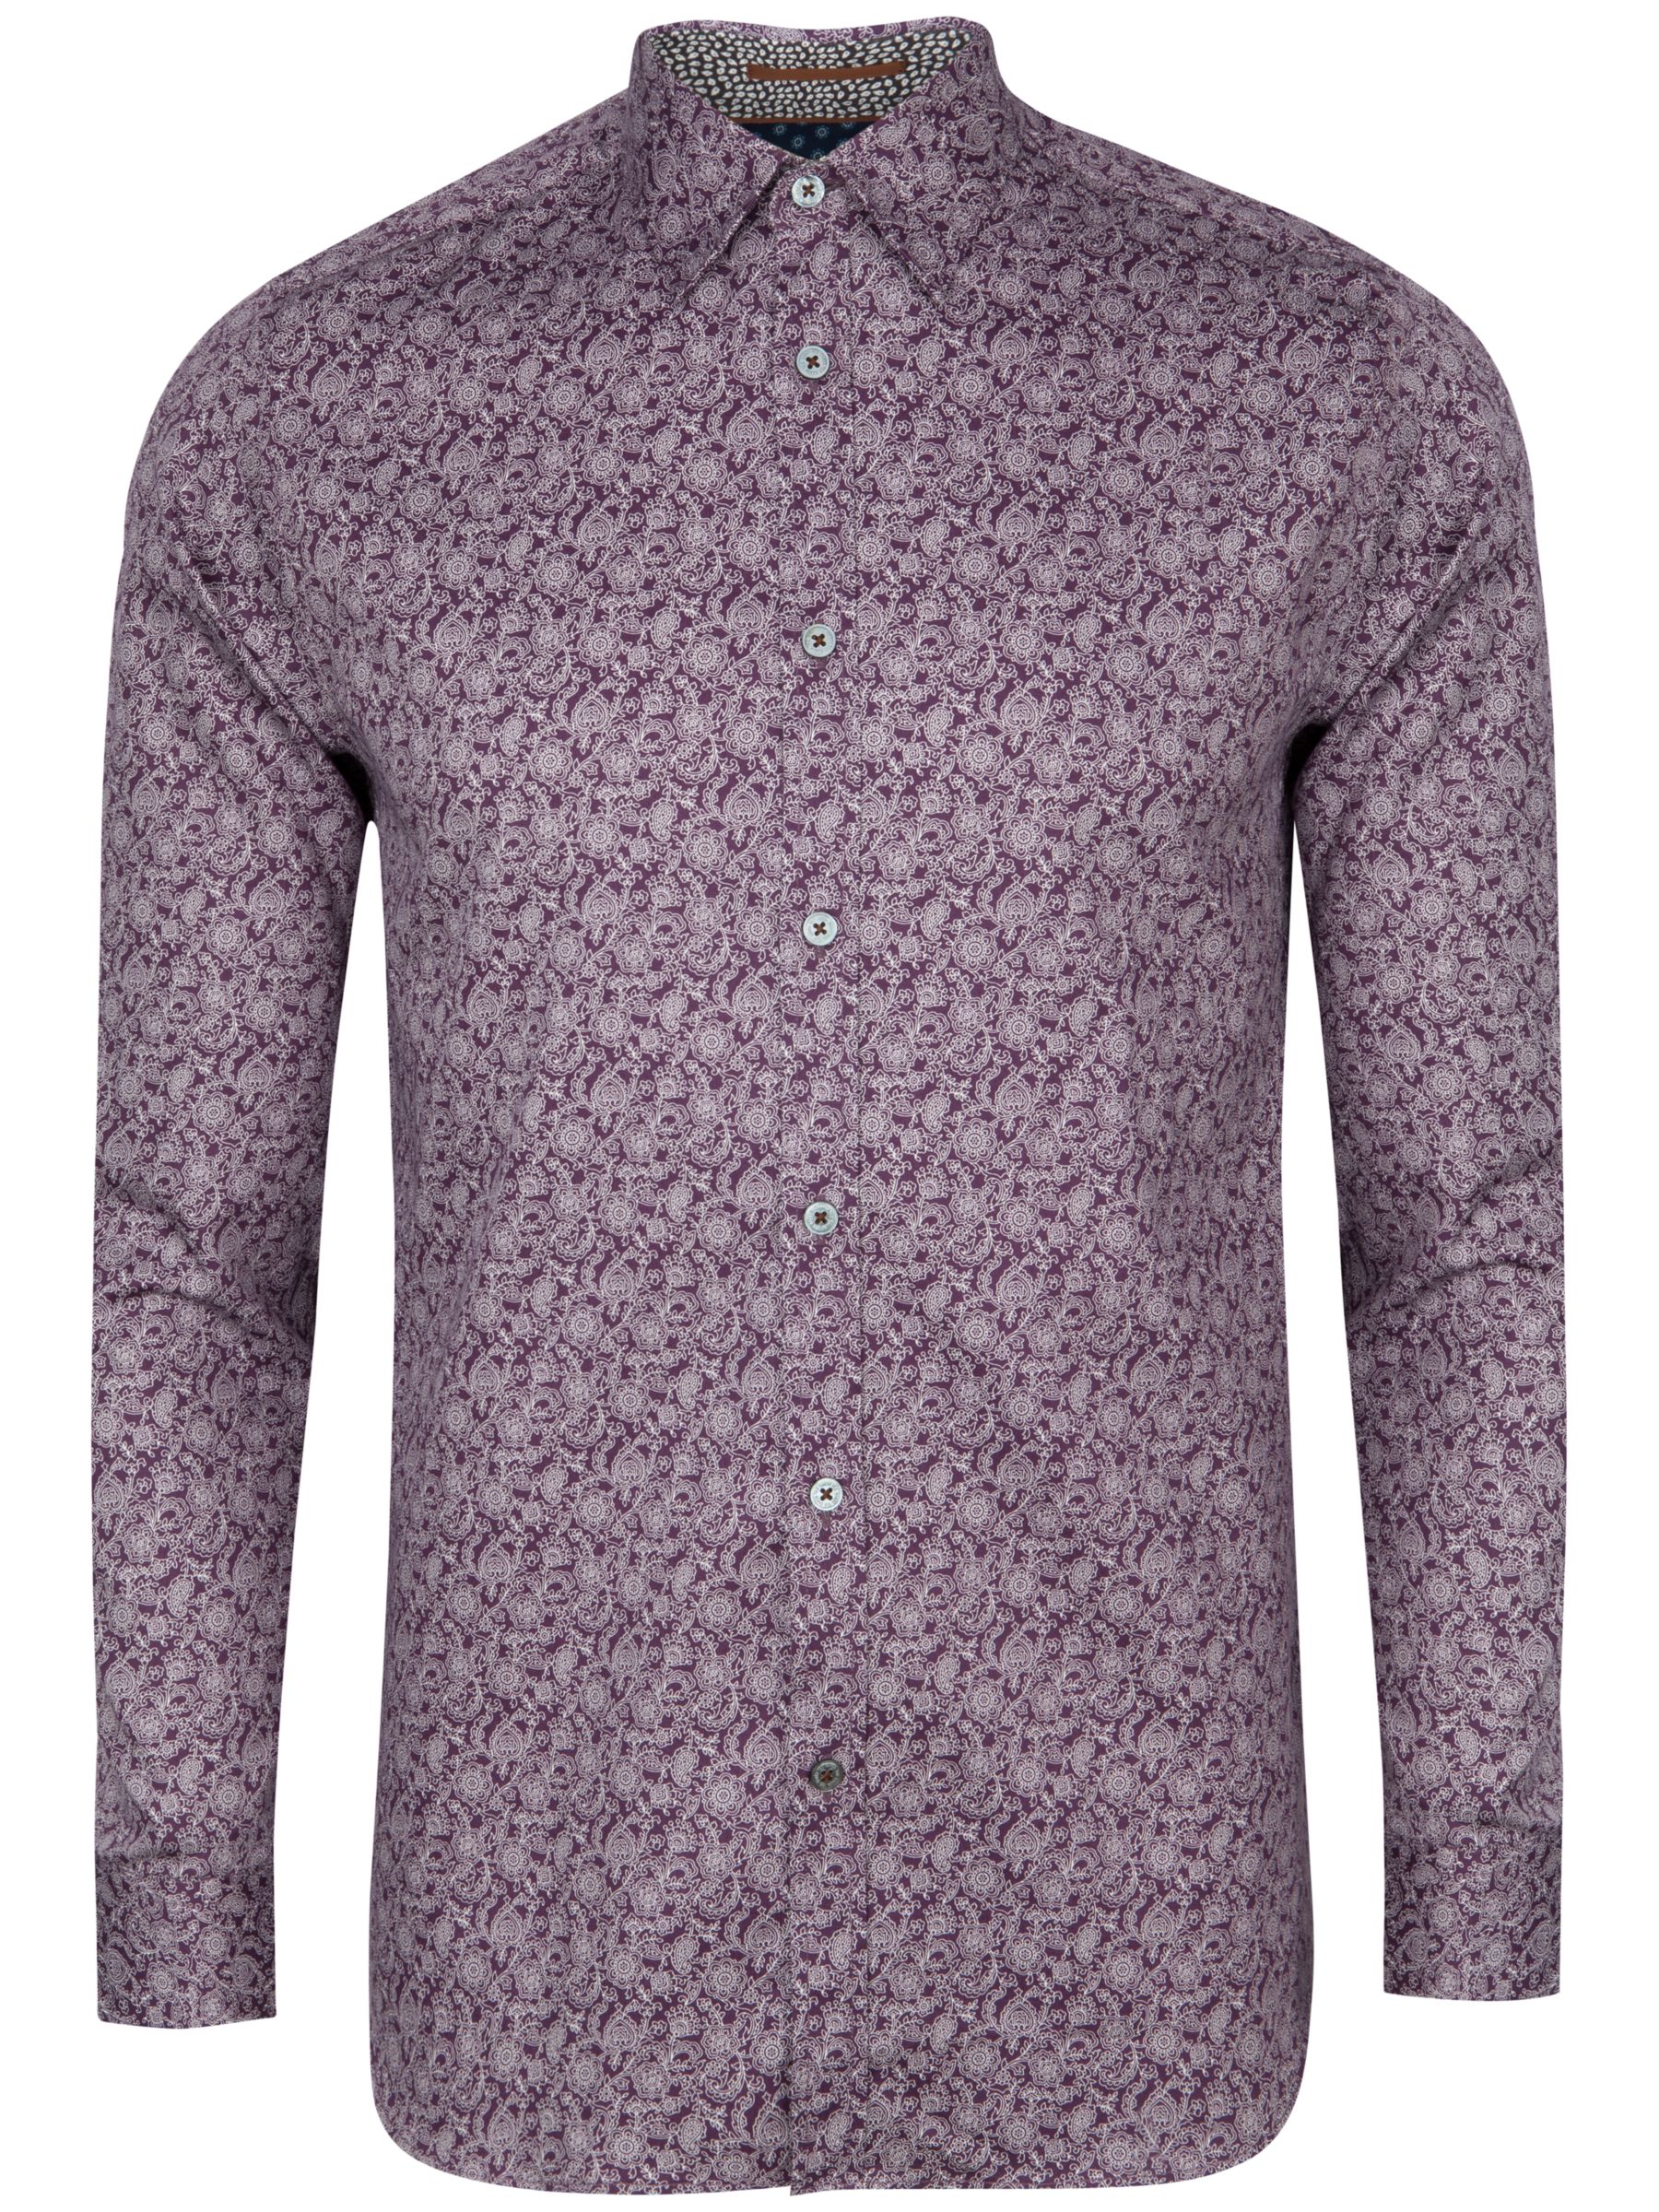 Ted Baker Florall Floral Print Long Sleeve Shirt, Purple, 3